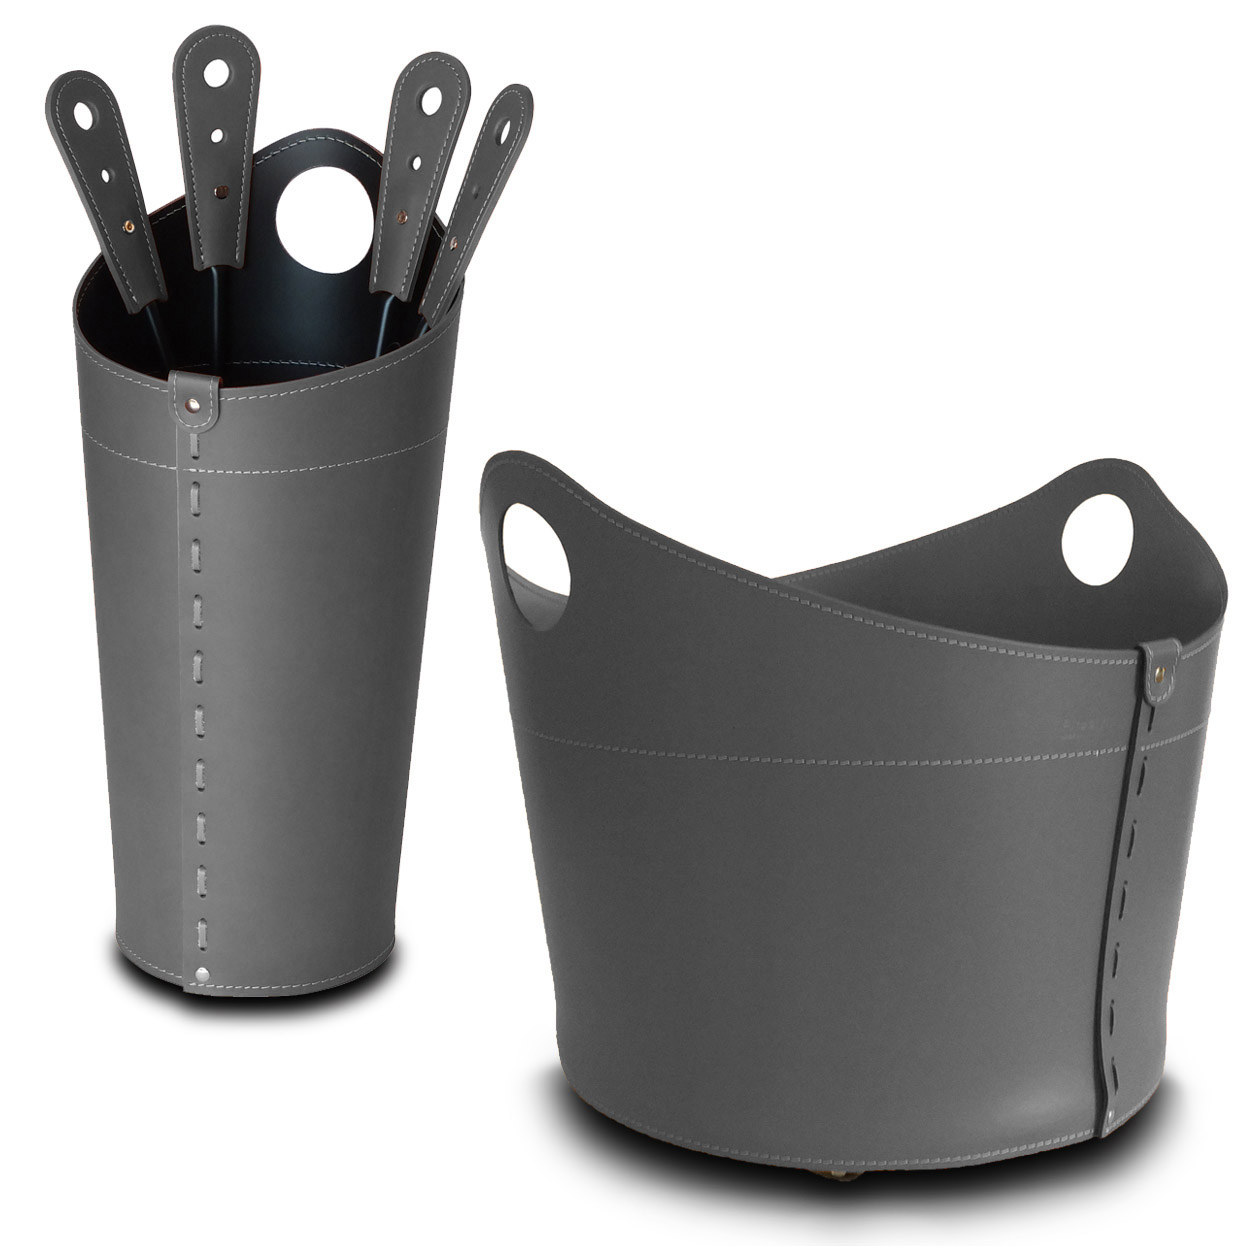 Fireplace set 3 pieces in leather NICAD – Anthracite